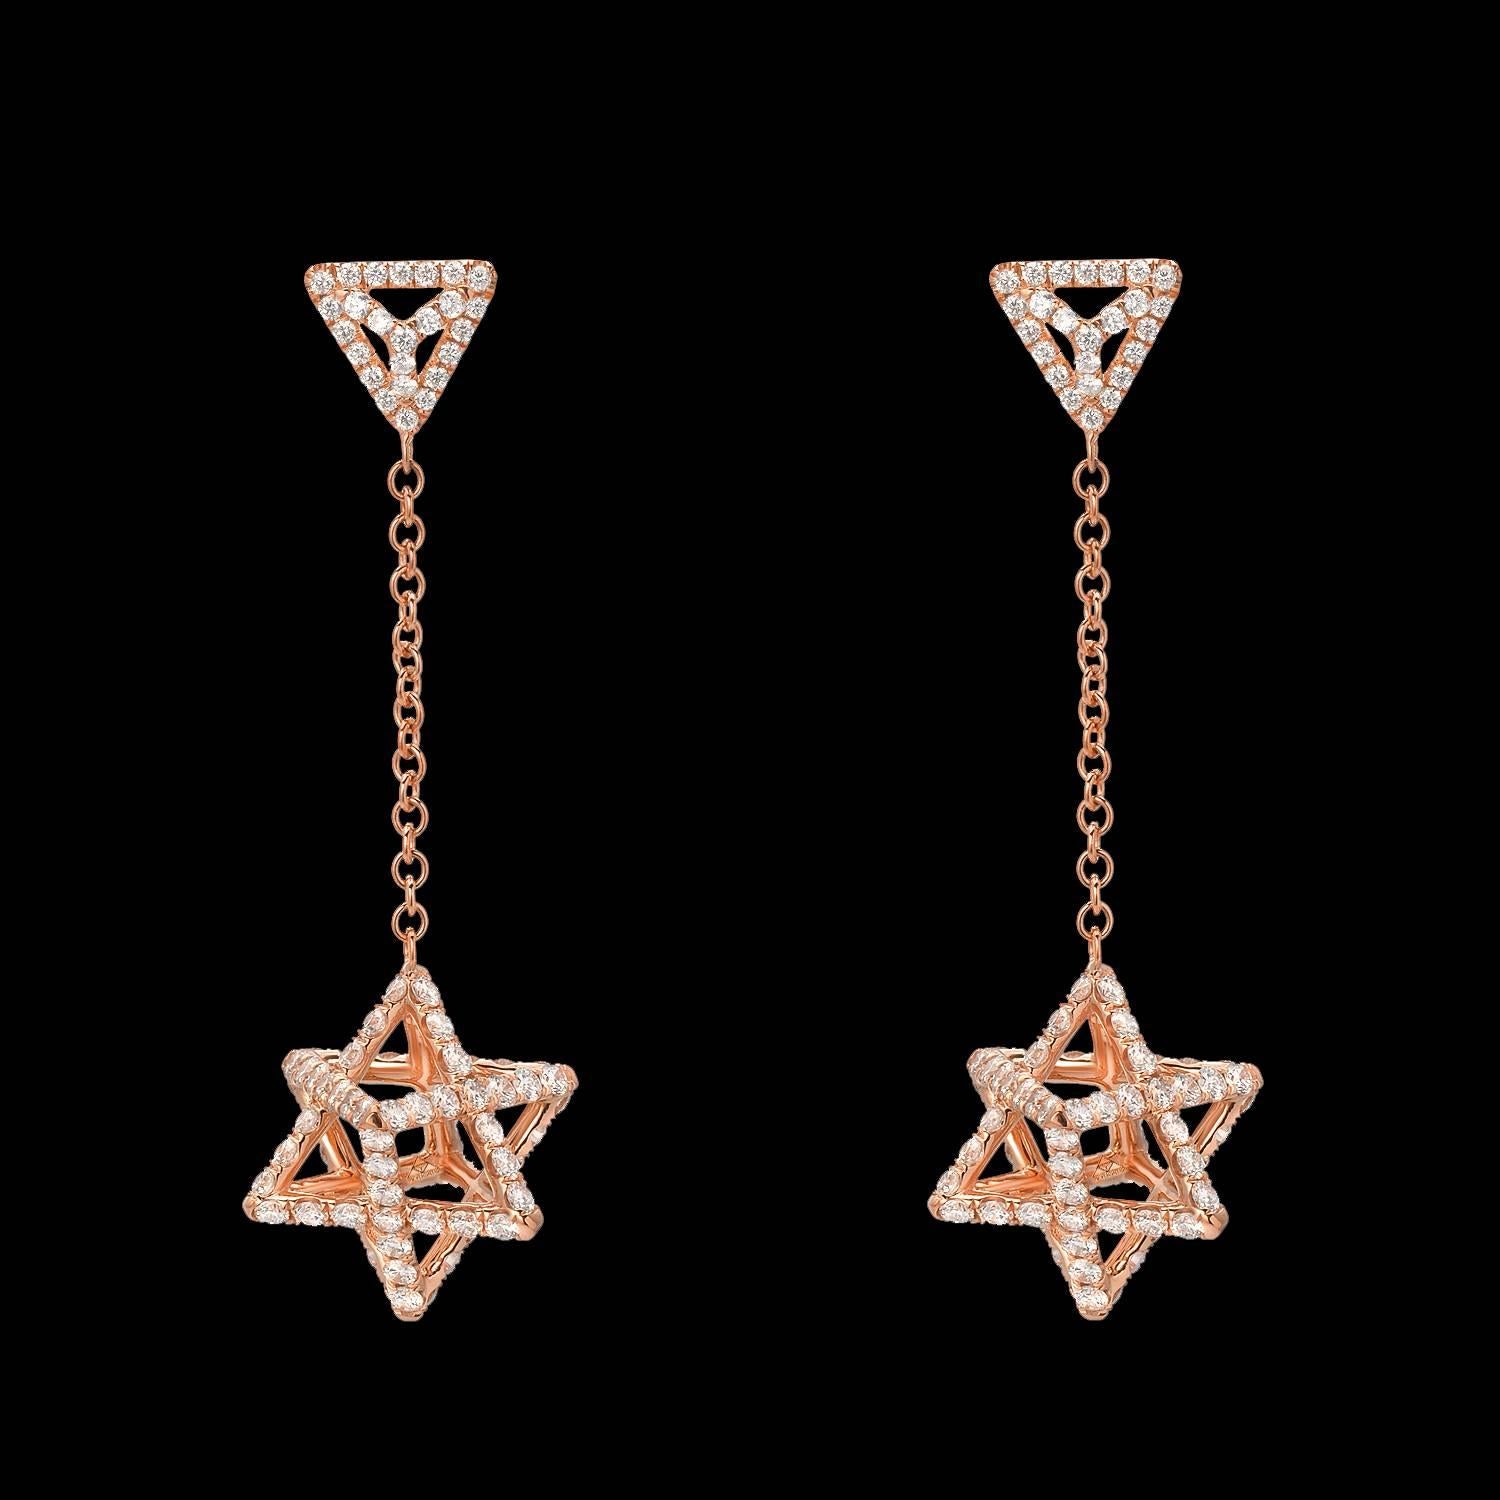 Merkaba 18K rose gold drop earrings, tethered by a triangle stud, feature a cable chain suspending a Merkaba star measuring 0.57 inches. Secure screw backs mirror the triangle motif. Set with a total of approximately 2.39 carats of round brilliant